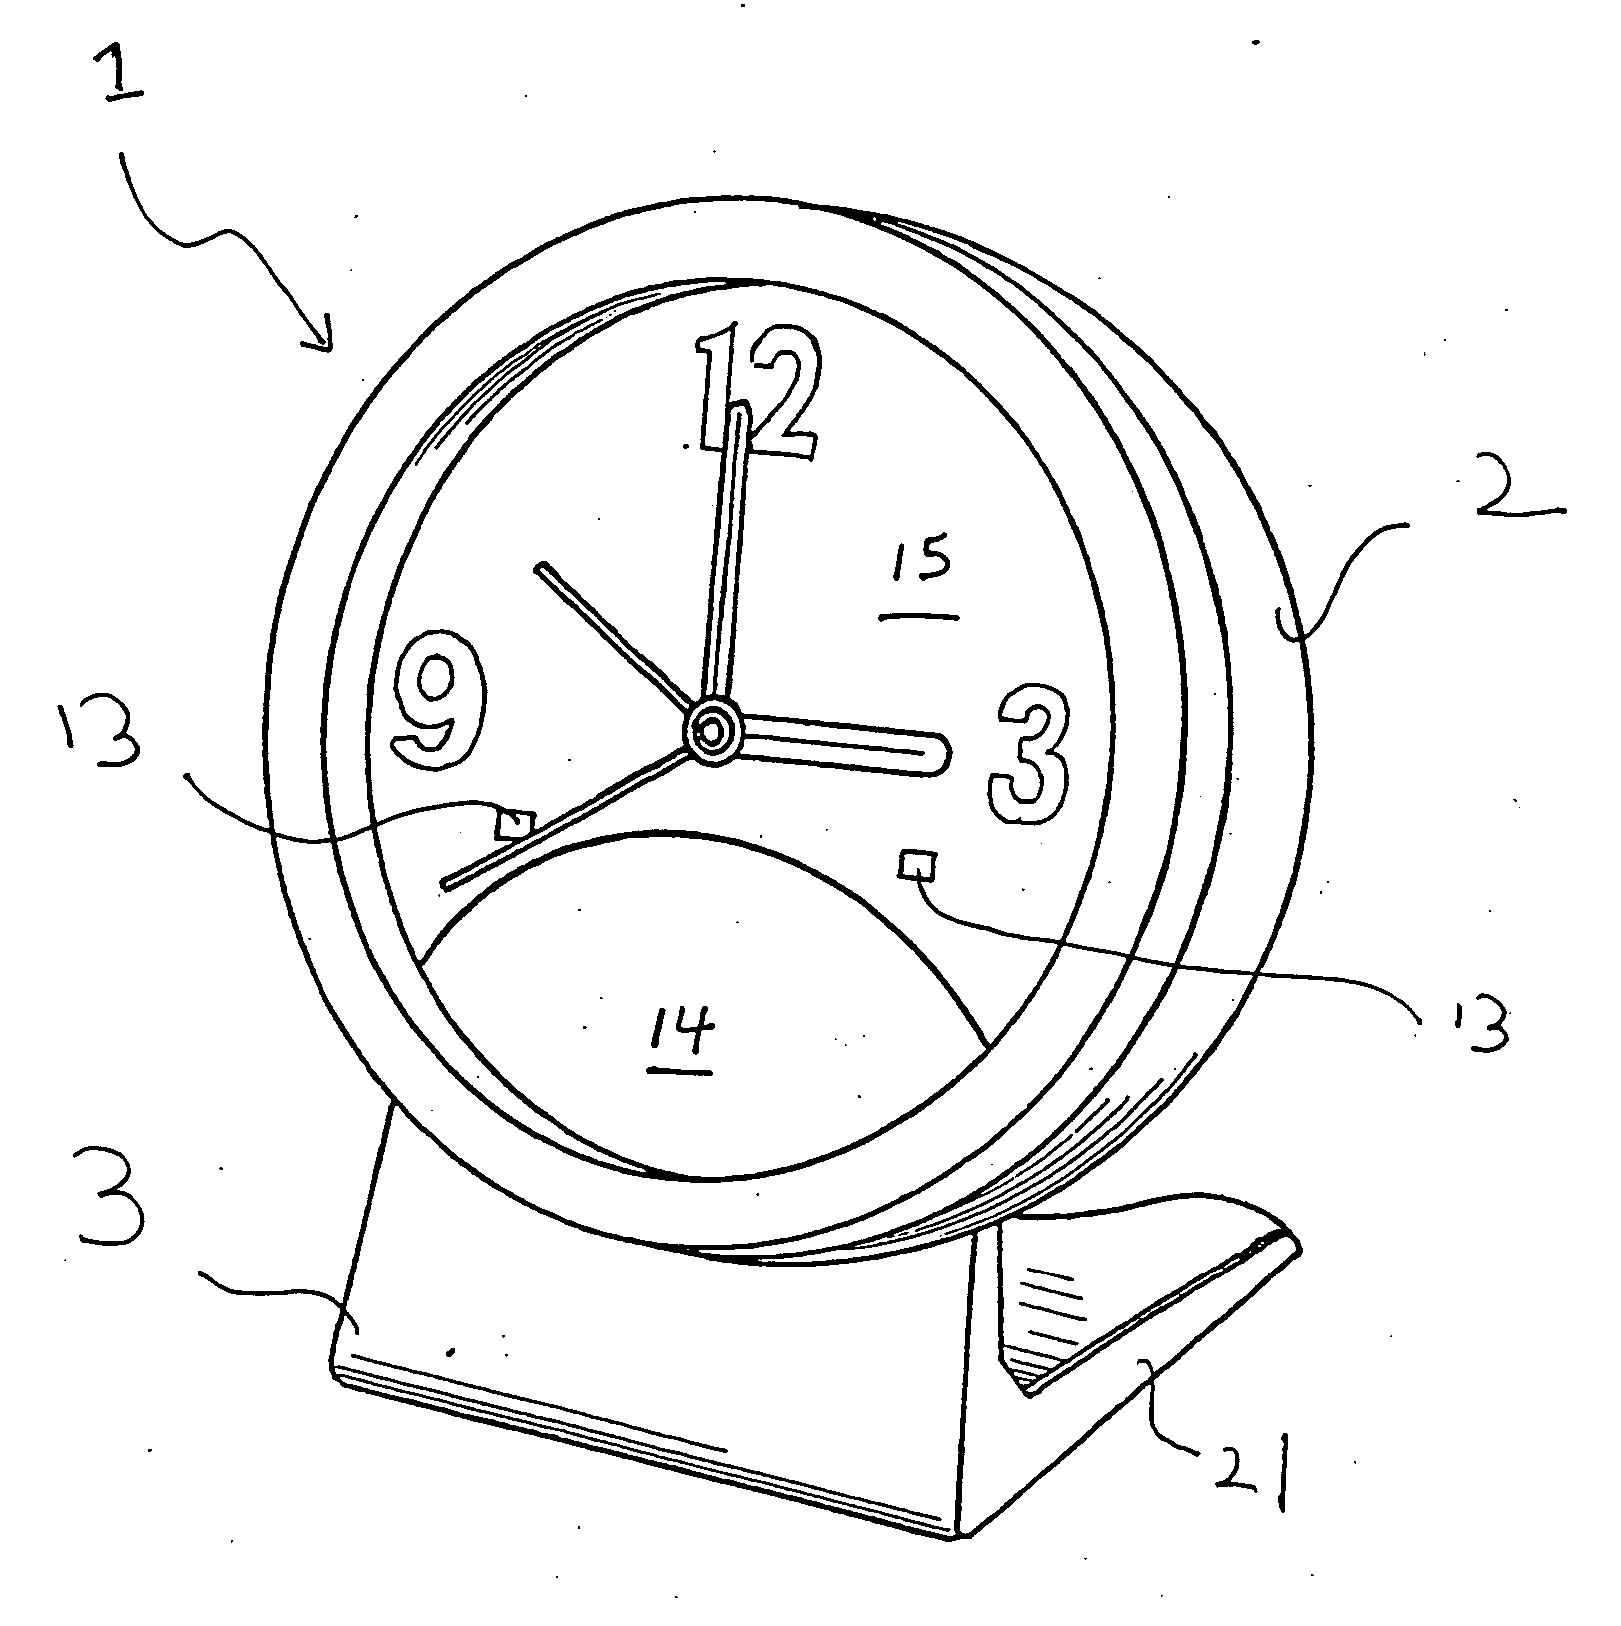 Clock with an inserted base